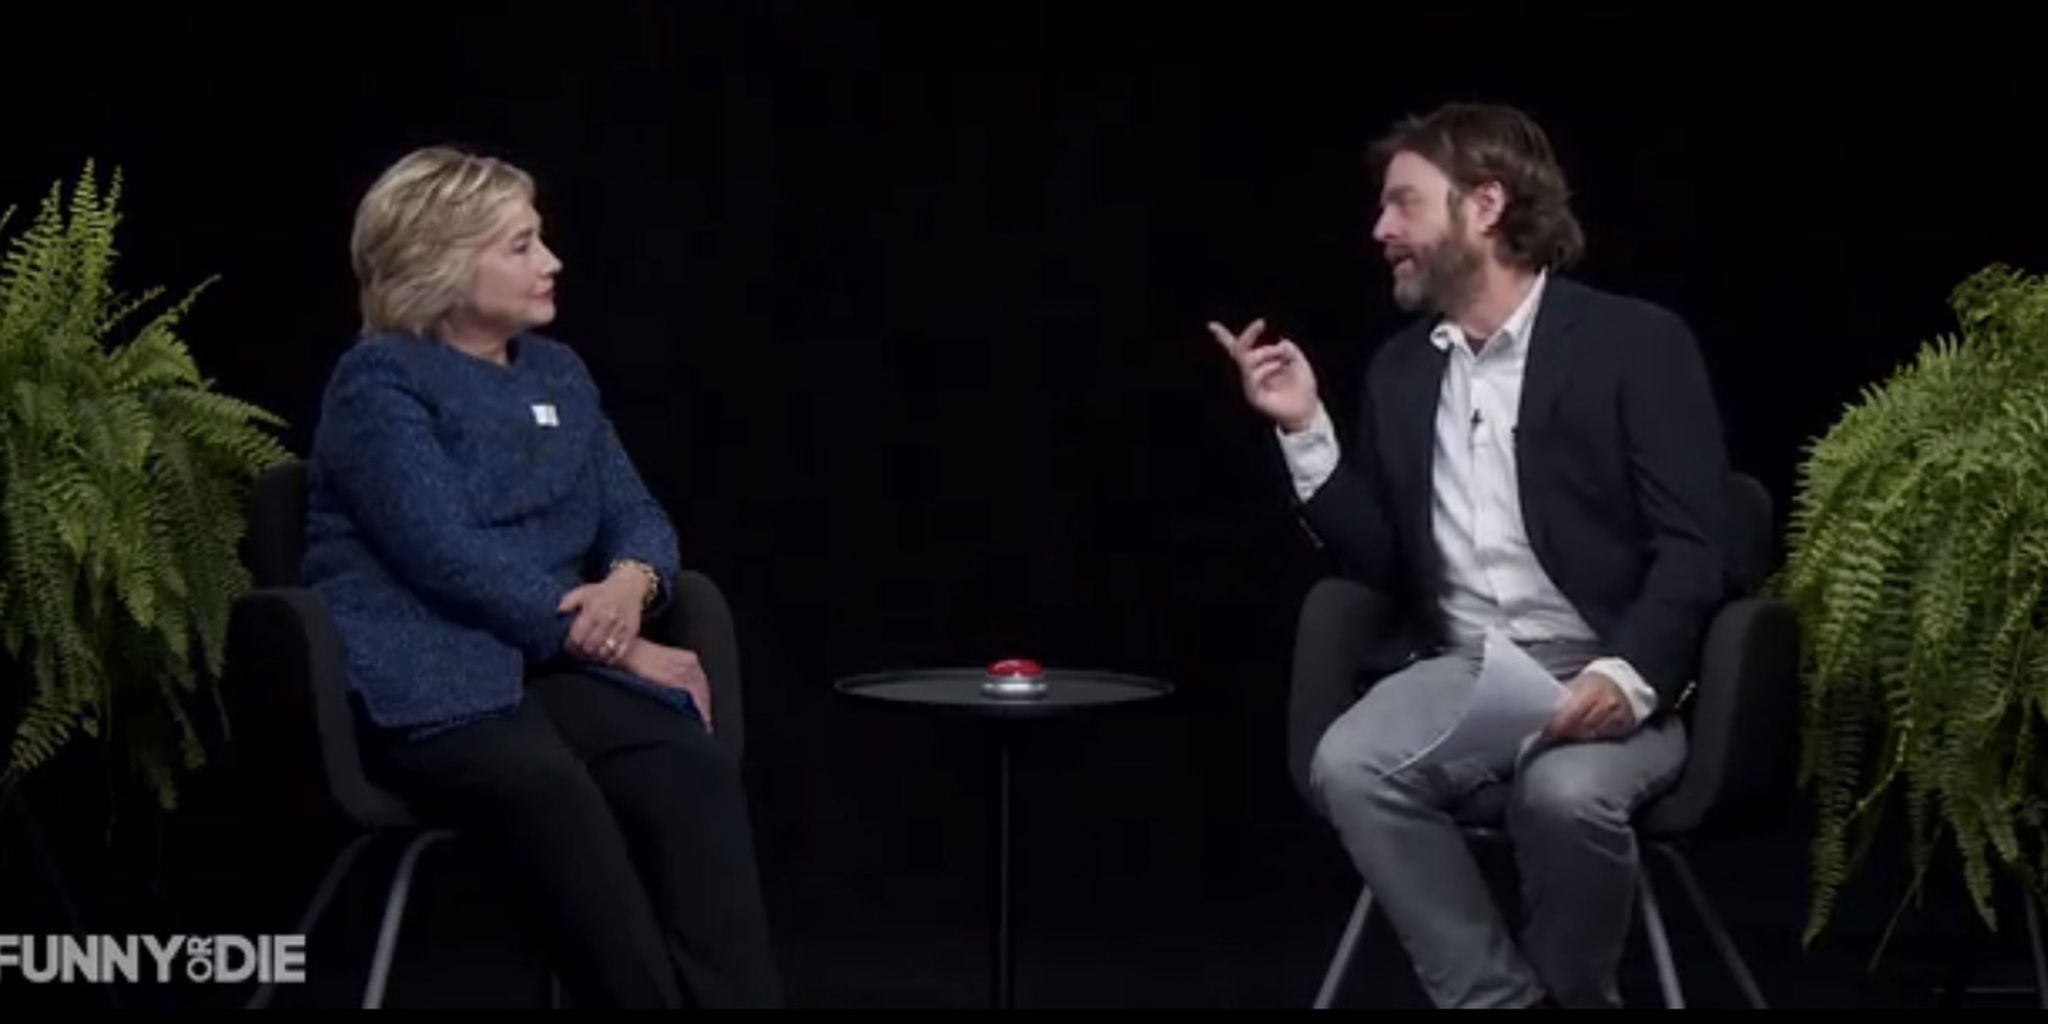 Hilary Clinton on Between Two Fearns